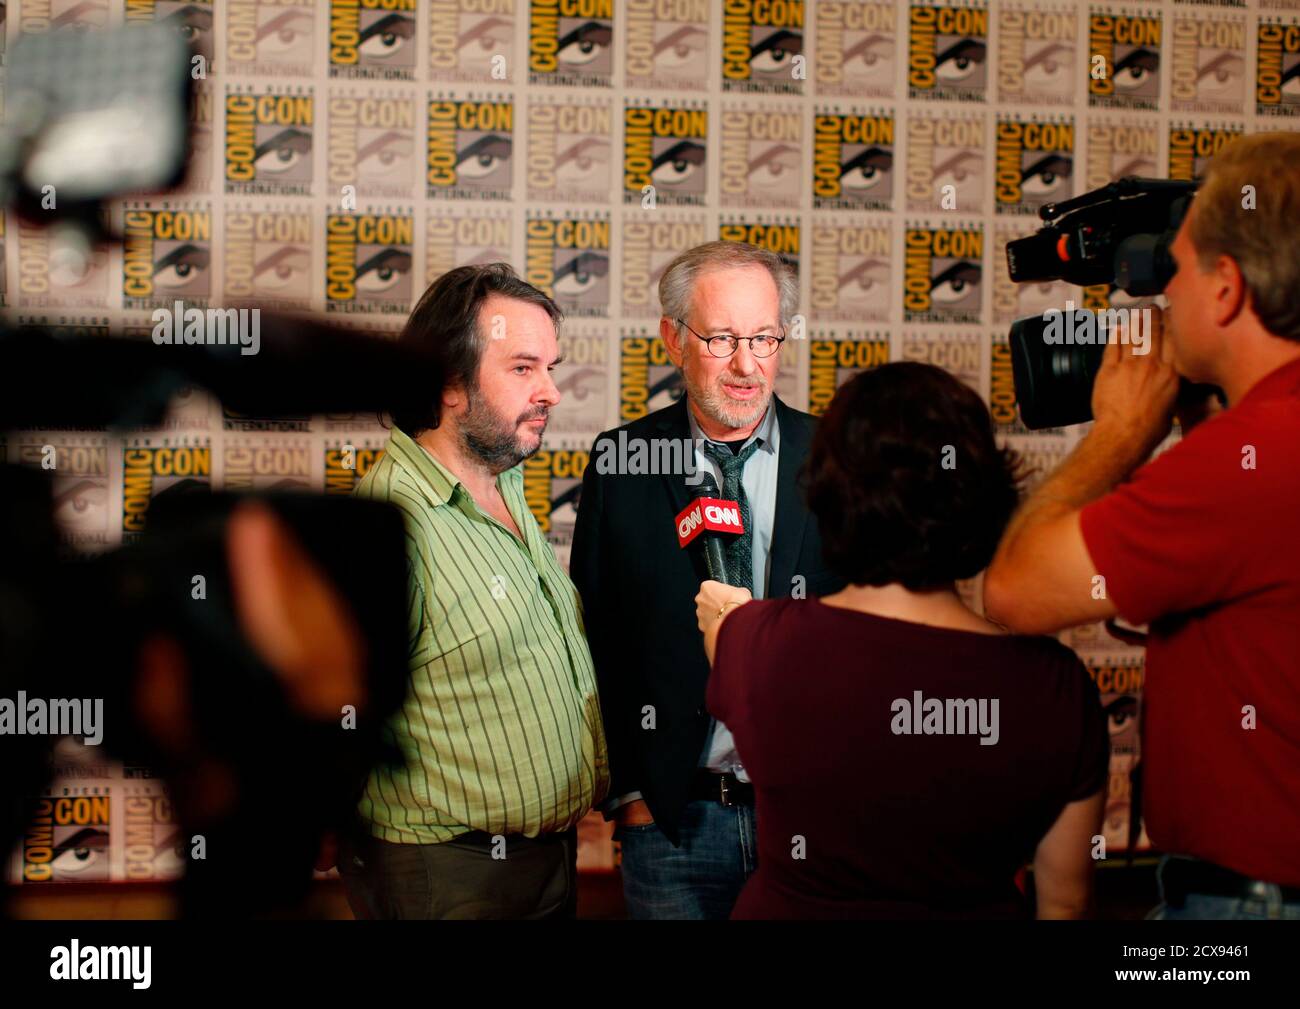 Director Steven Spielberg and film producer Peter Jackson (L) are interviewed about their upcoming motion picture 'The Adventures of Tin Tin' at the pop culture event Comic Con in San Diego, California July 22, 2011.   REUTERS/Mike Blake  (UNITED STATES - Tags: ENTERTAINMENT SOCIETY PROFILE) Stock Photo